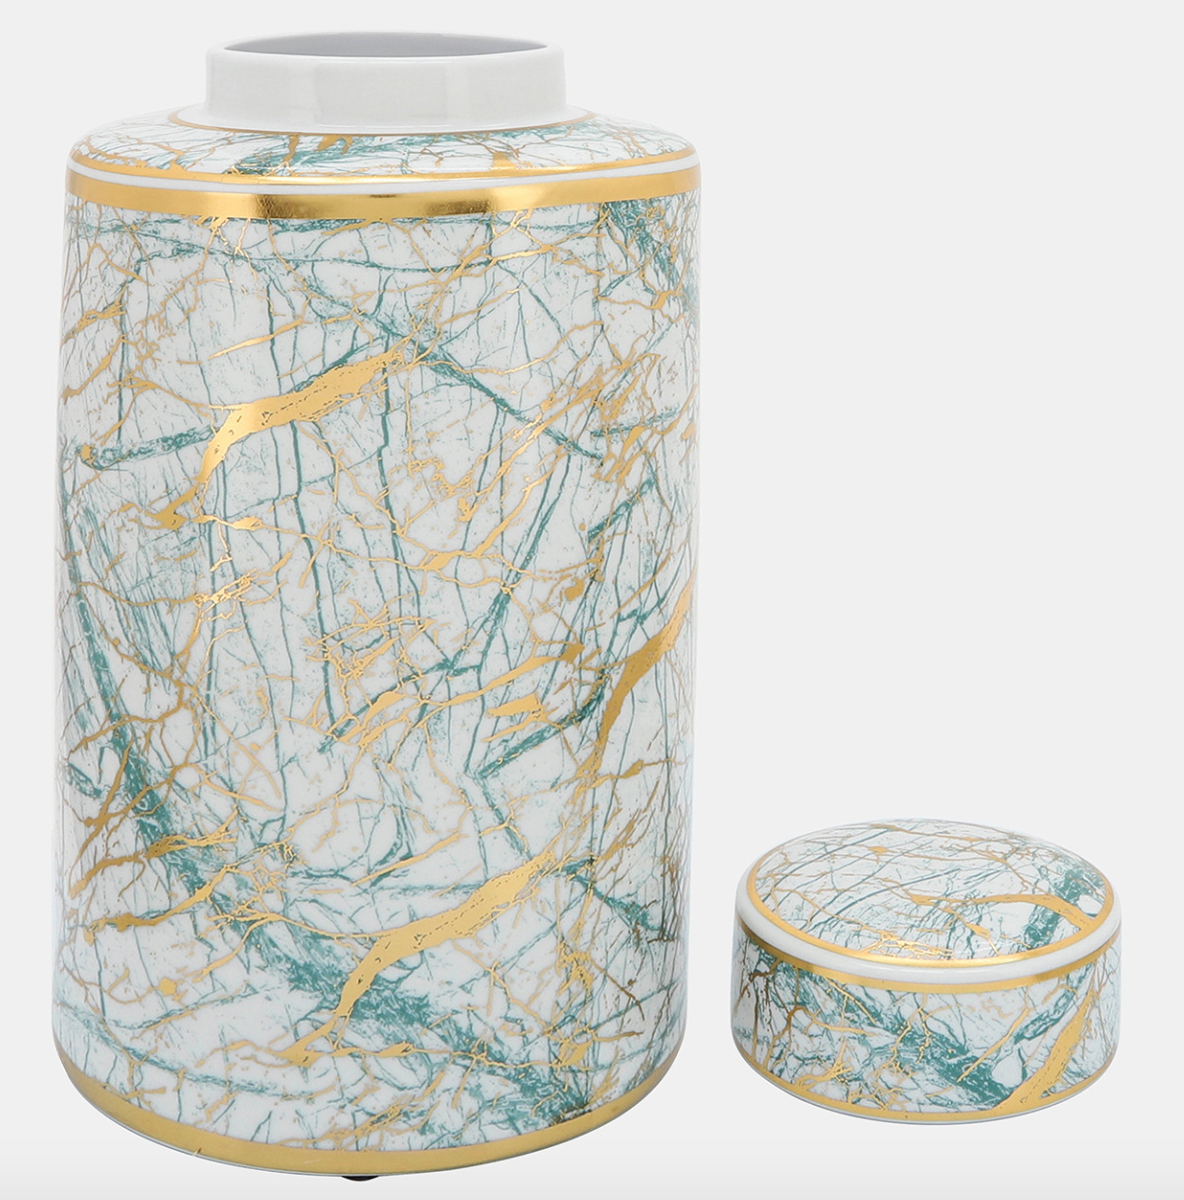 Lolita Ceramic Green, Gold White Marble Jar With Lid 12'' 16''